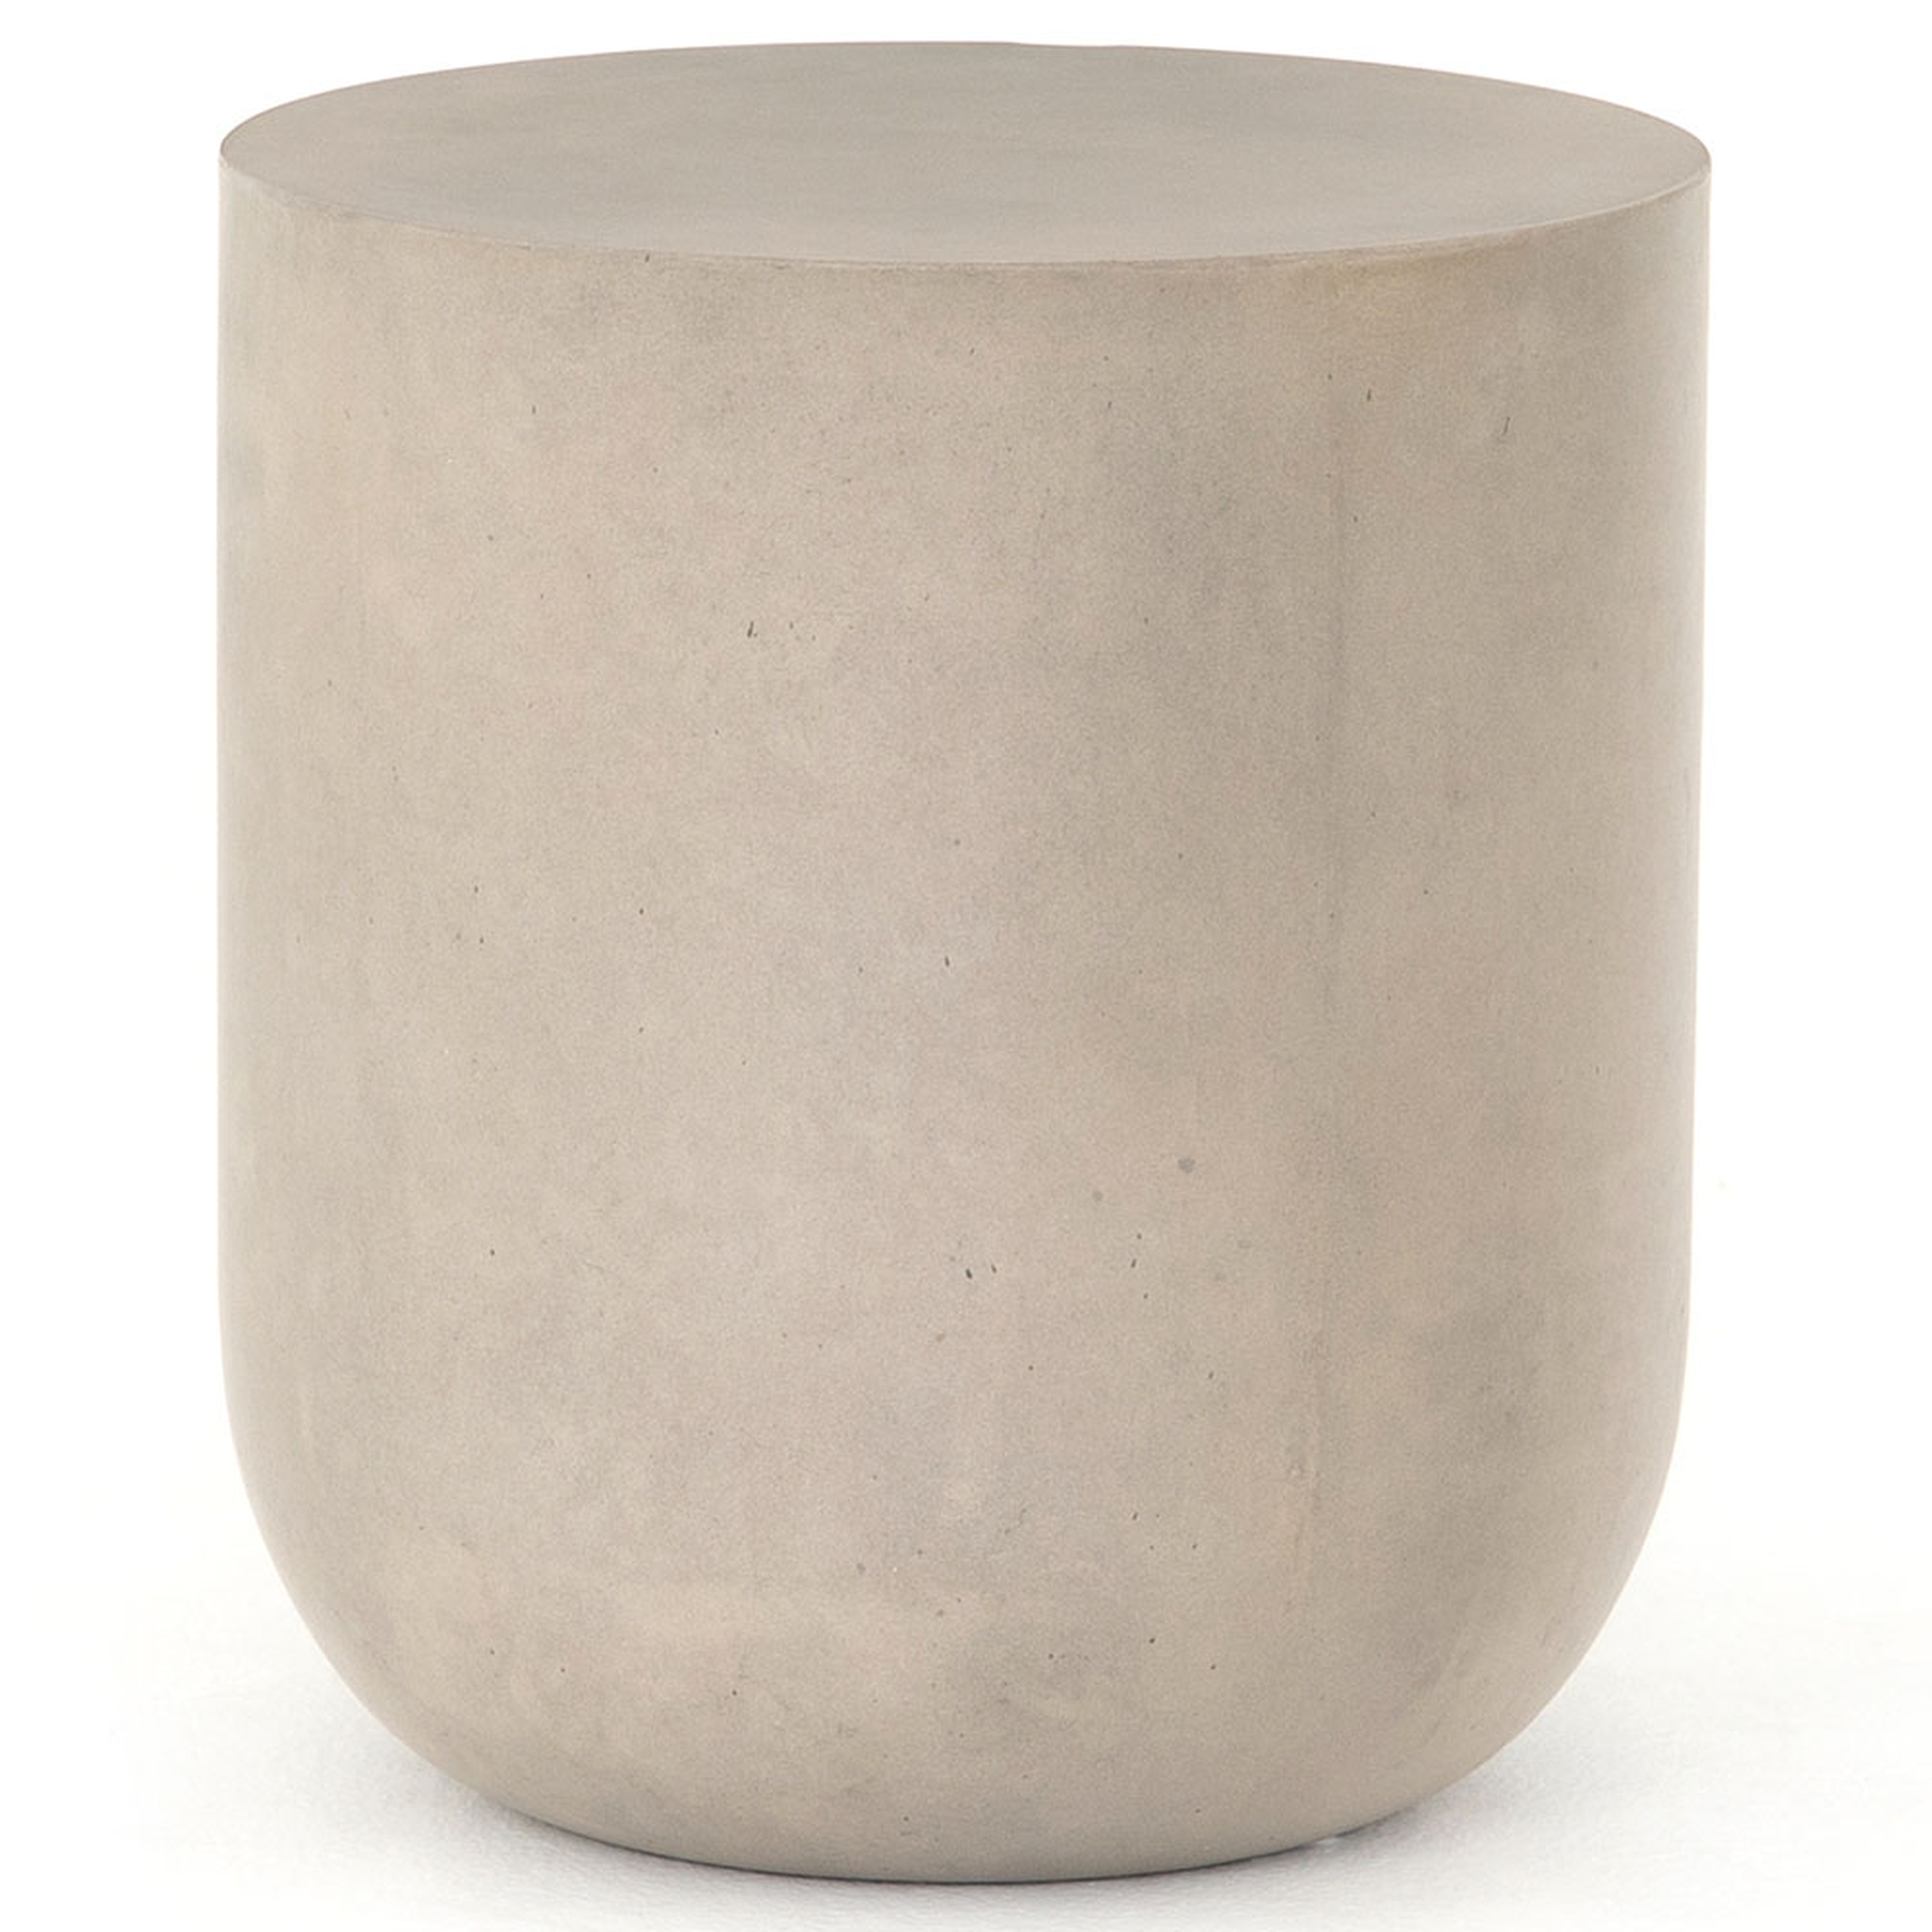 Lana Modern Concrete Round Drum Outdoor End Table, Classic Gray - Kathy Kuo Home